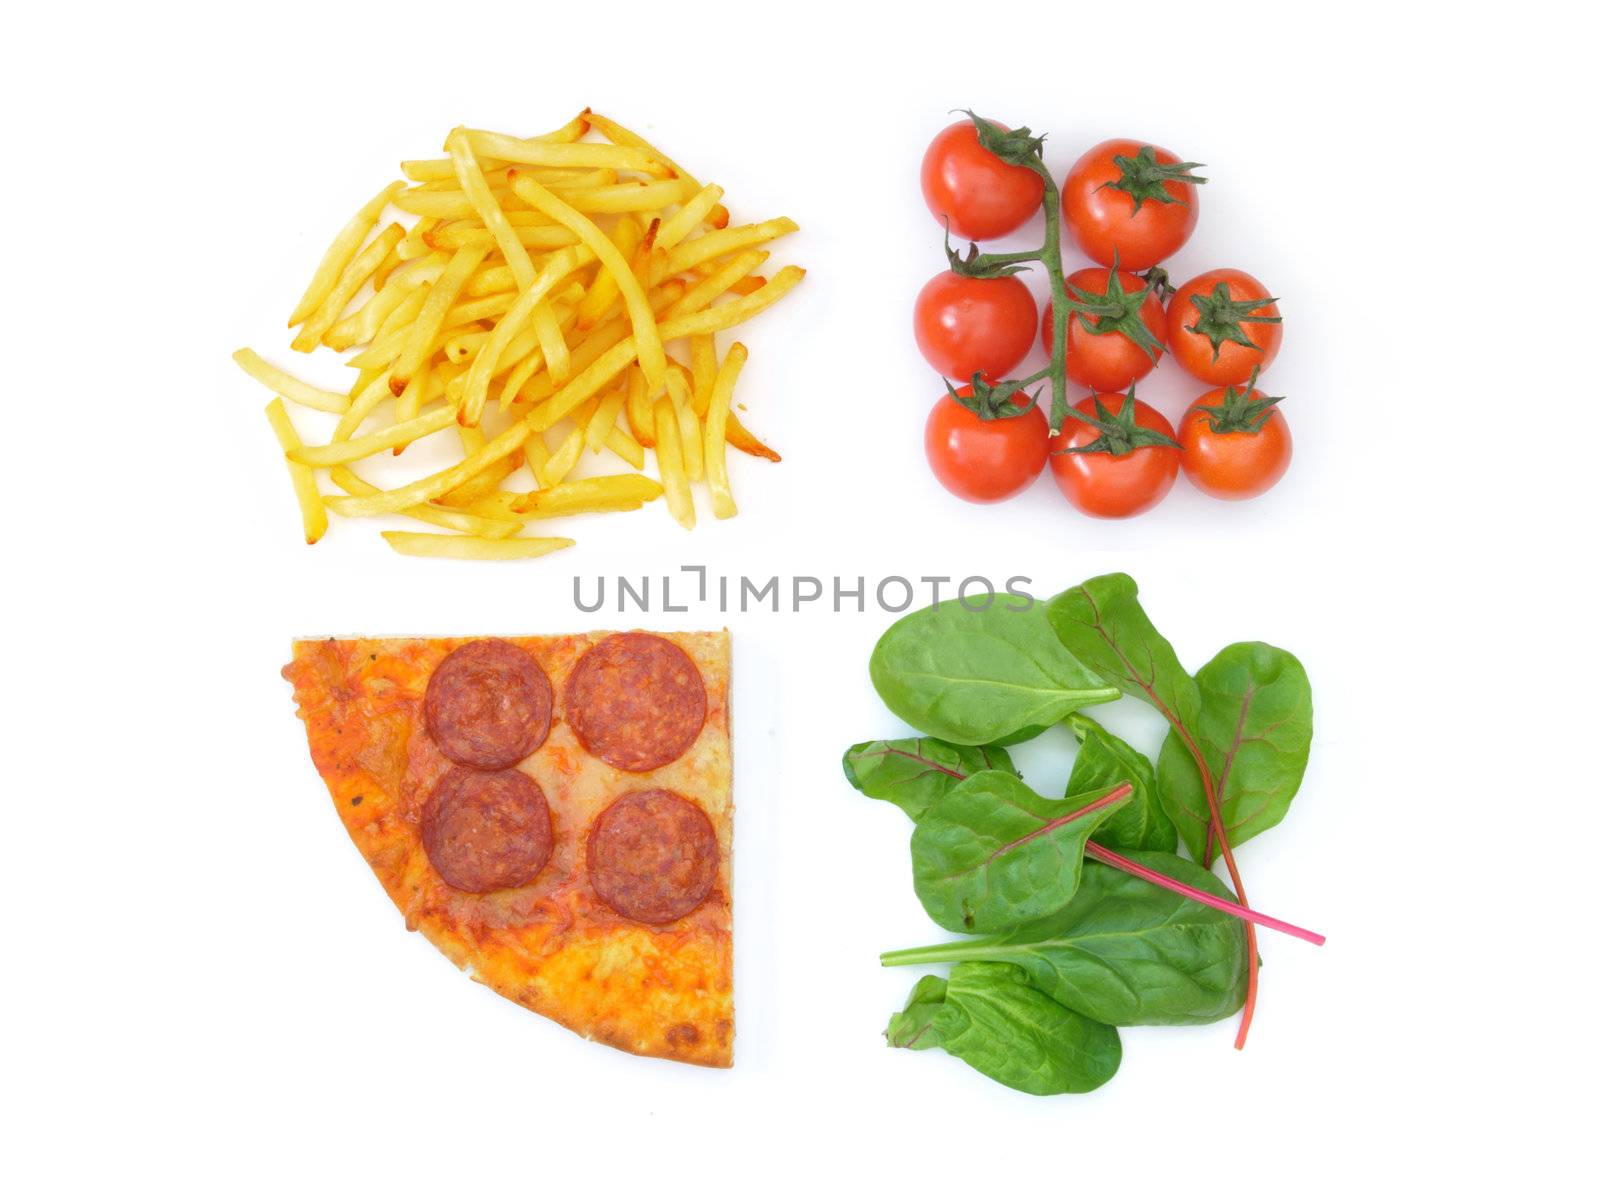 Fast food pizza and french fries on one side and cherry tomatoes and salad leaves on the other 